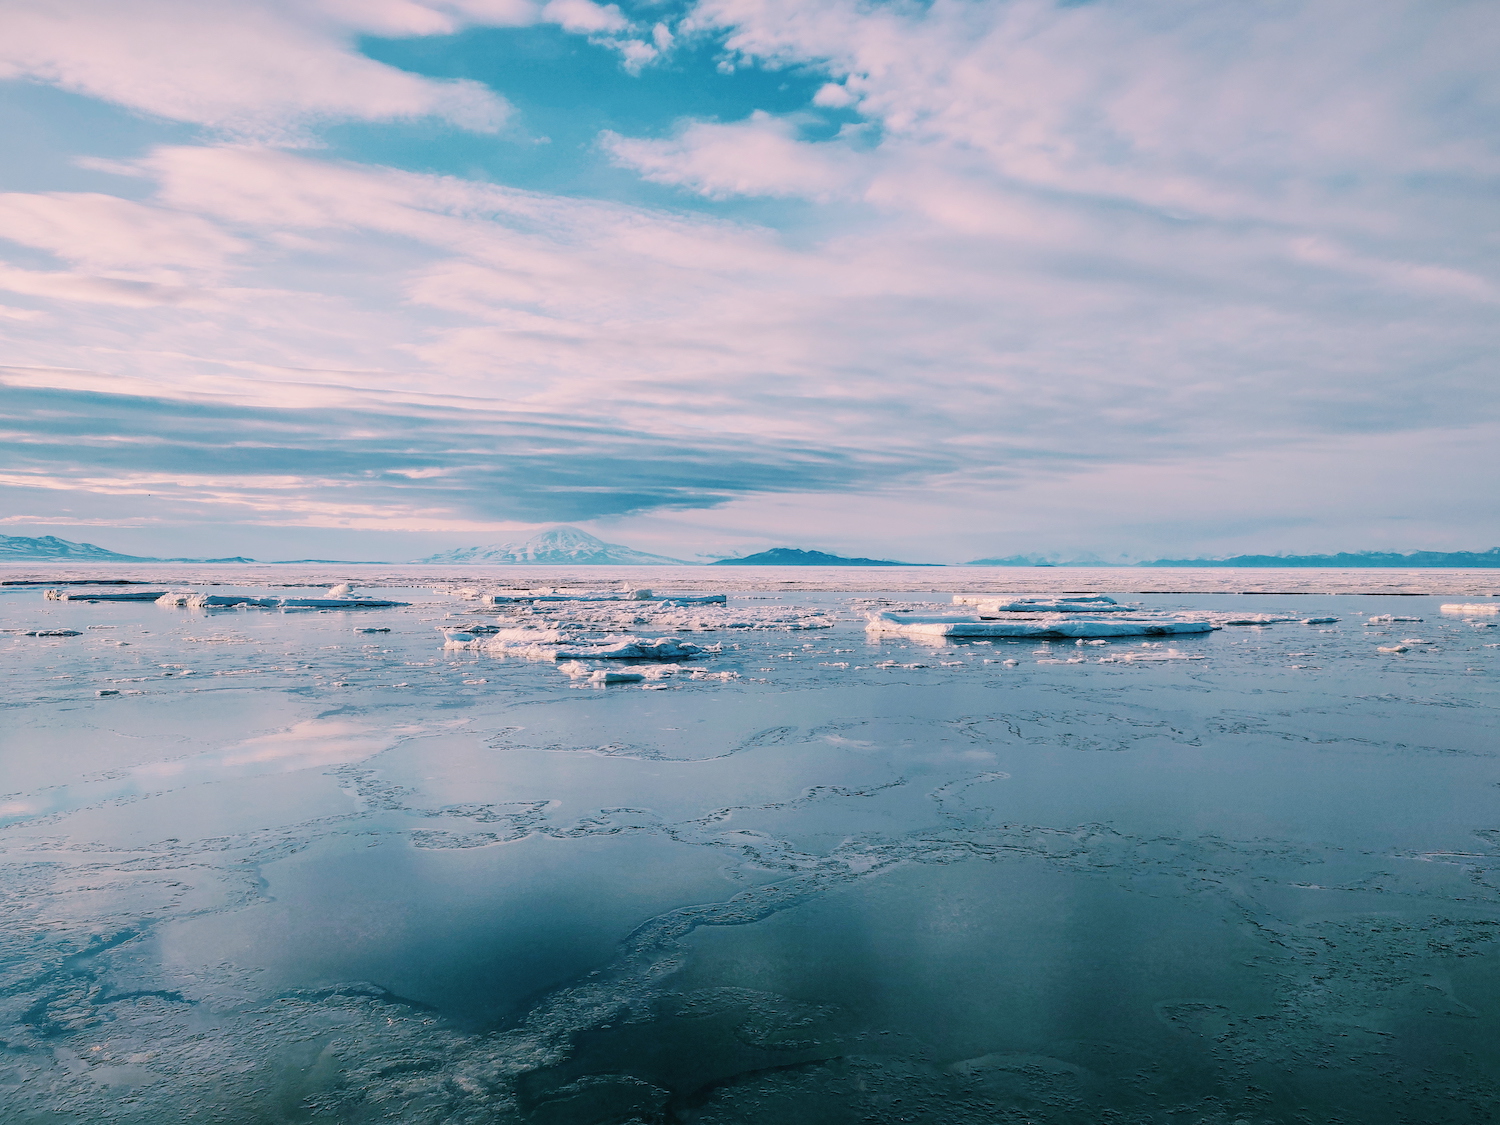 Melting sea ice and drifting icebergs in McMurdo Sound